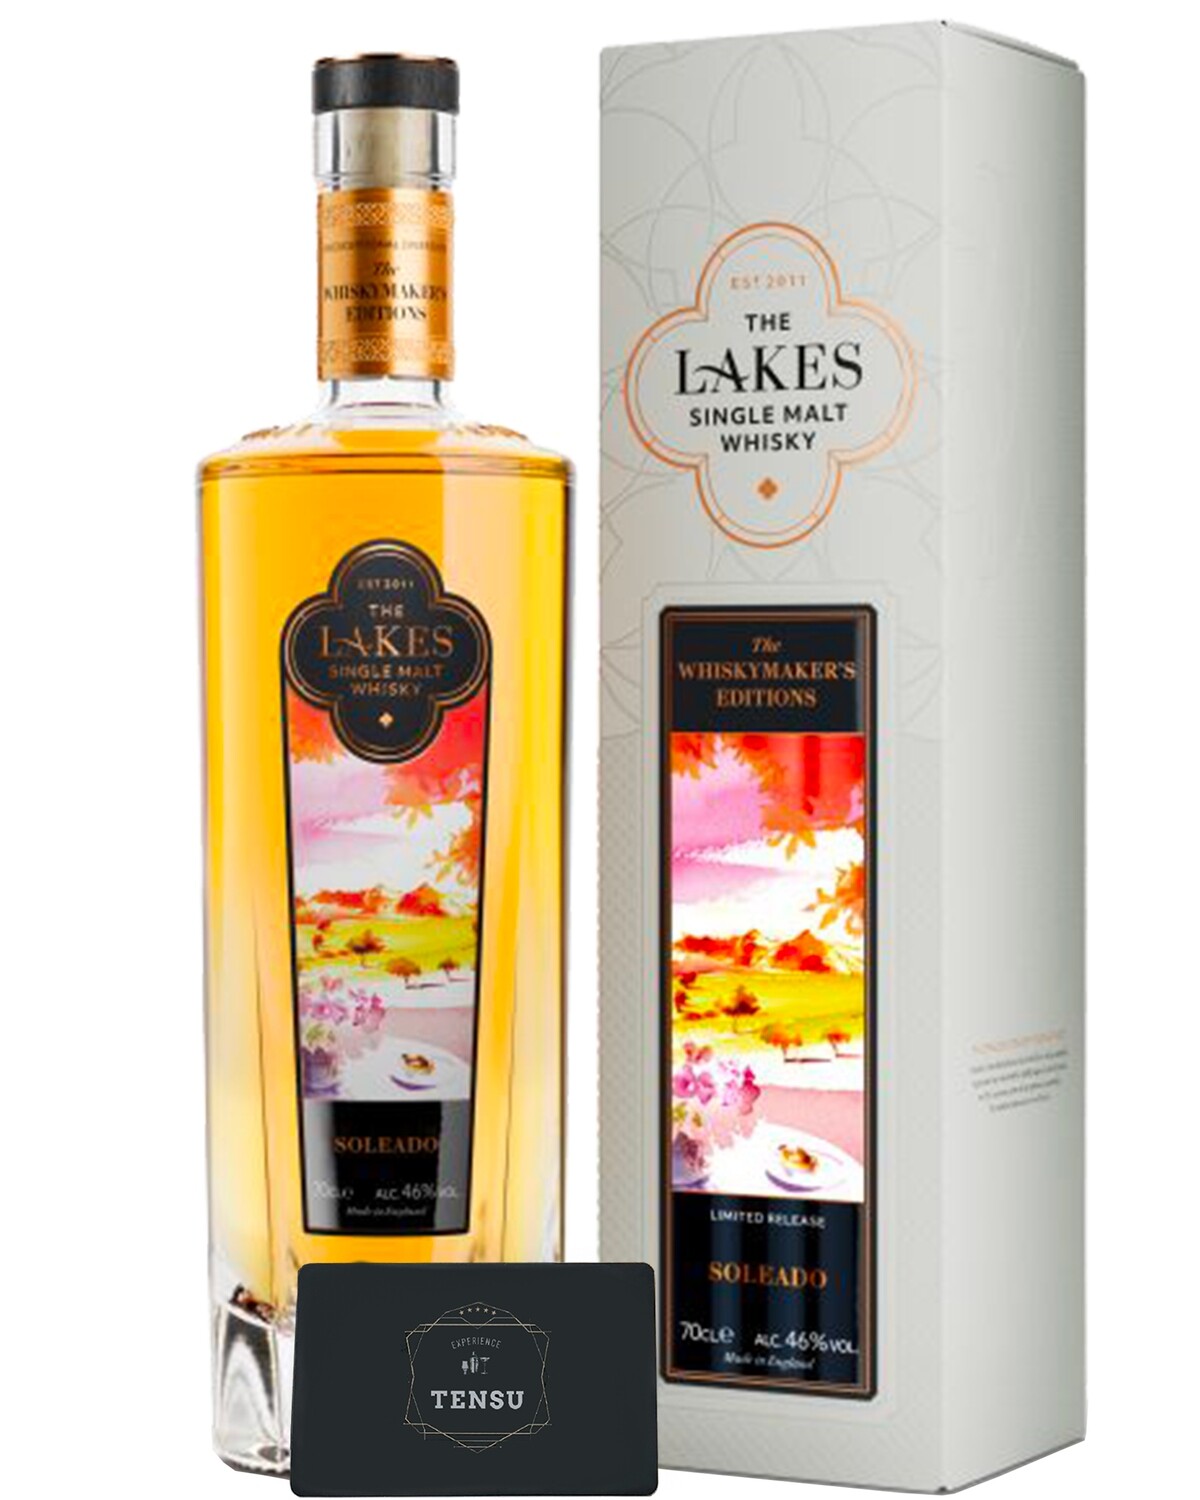 The Lakes - The Whiskymaker's Editions - Soleado 46.0 "The Lakes Distillery"